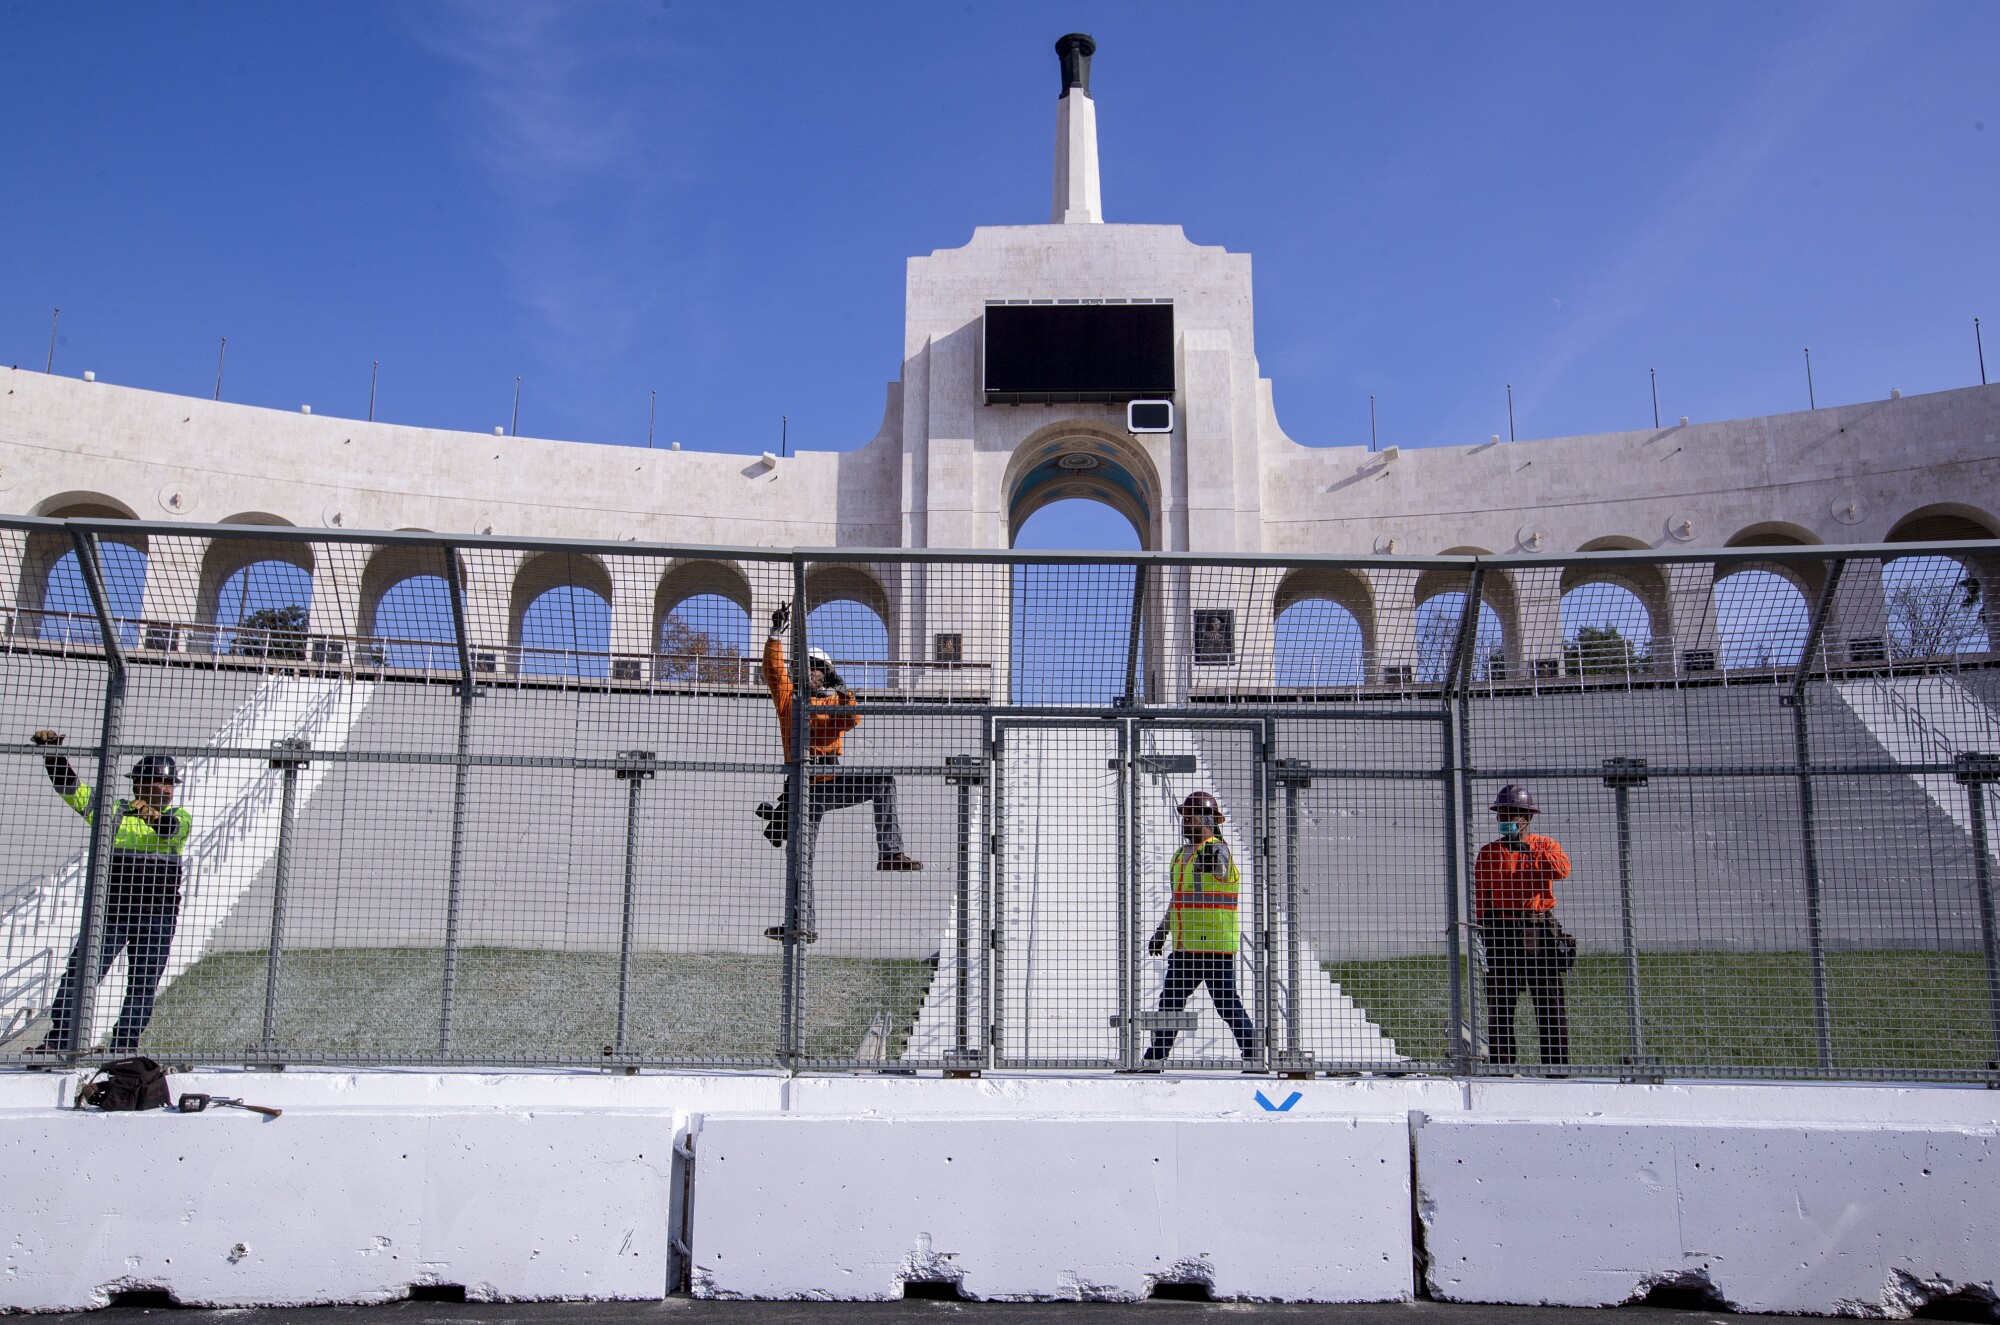 Construction staff is transforming the Colosseum into a NASCAR exhibition race on a quarter-kilometer short circuit